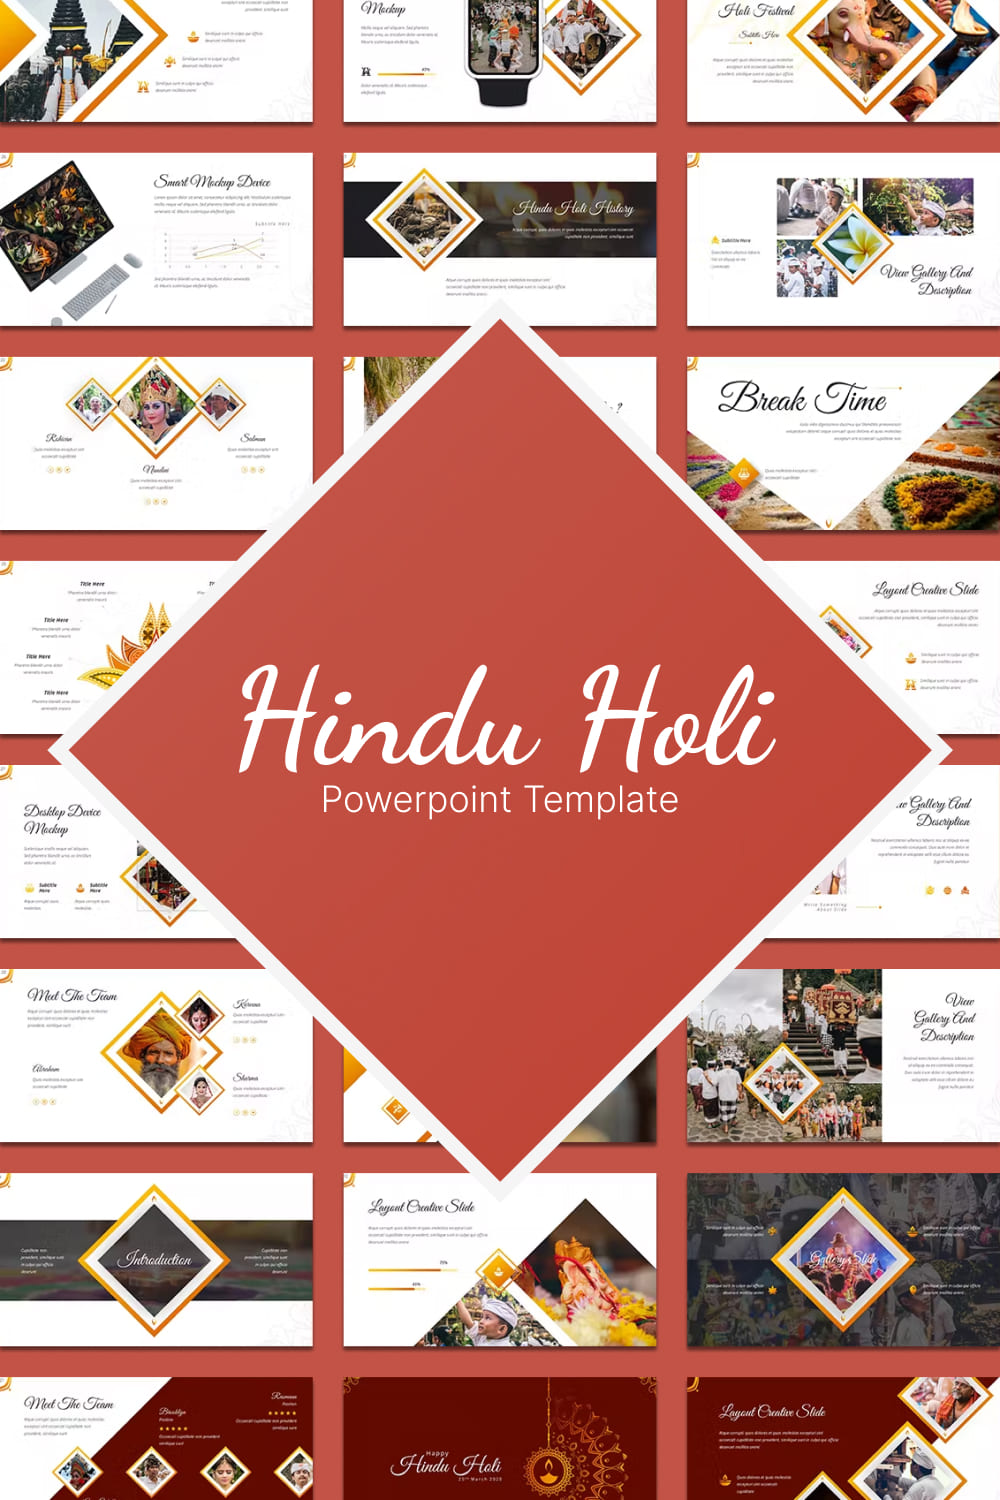 Hindu holi powerpoint template - pinterest image preview.